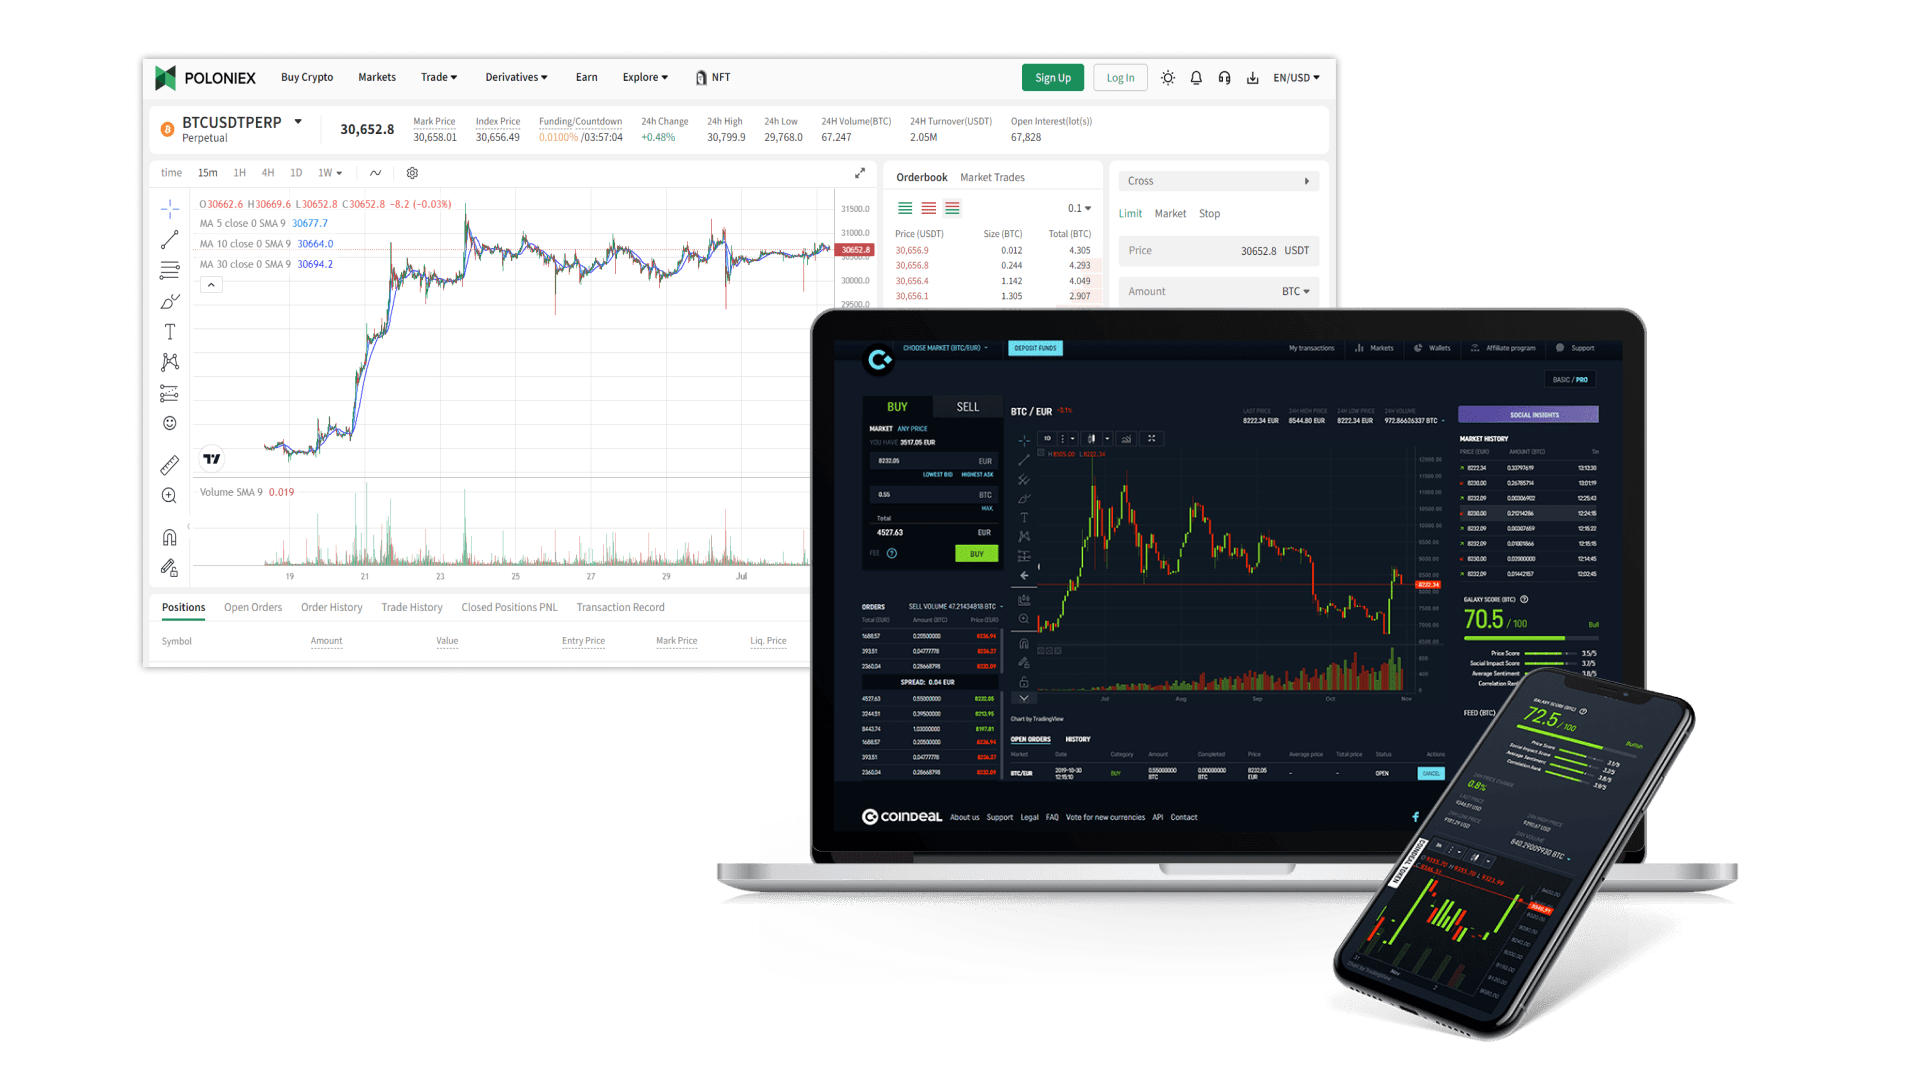 Development of a trading bot for trading on the Poloniex crypto exchange